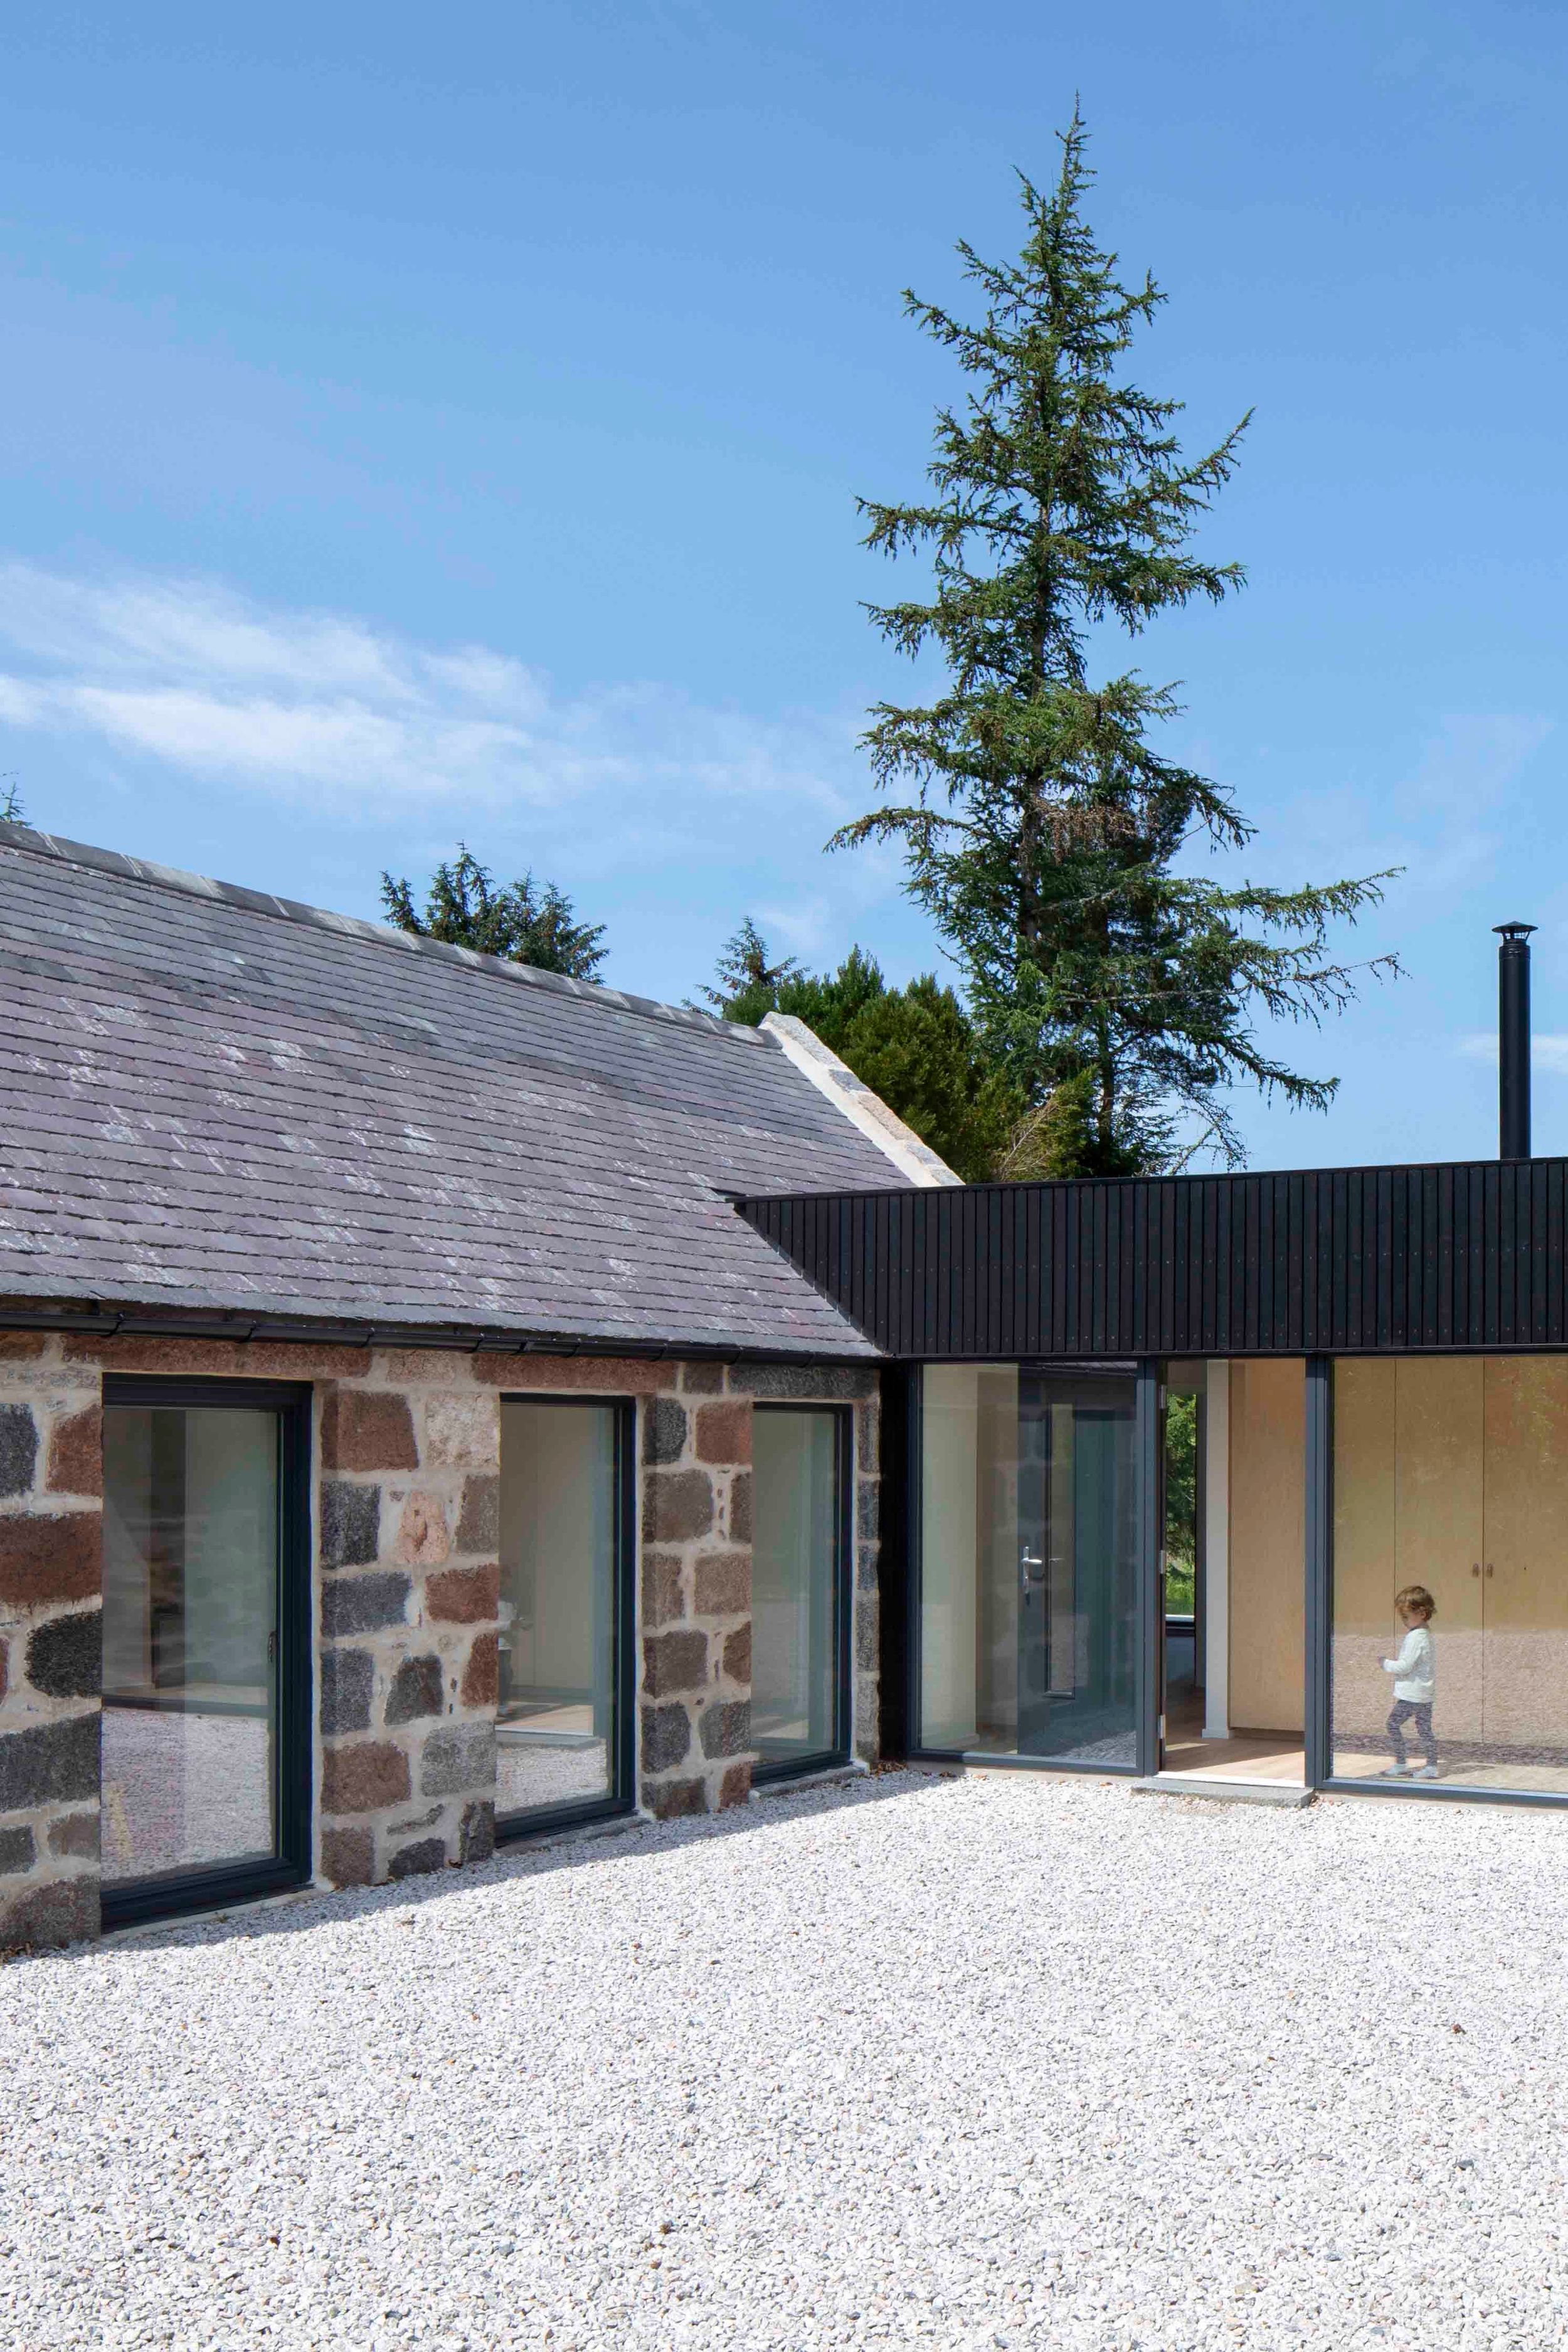 Traditional granite cottage and byre connected with modern, blackened timber and glass extension with a child walking.